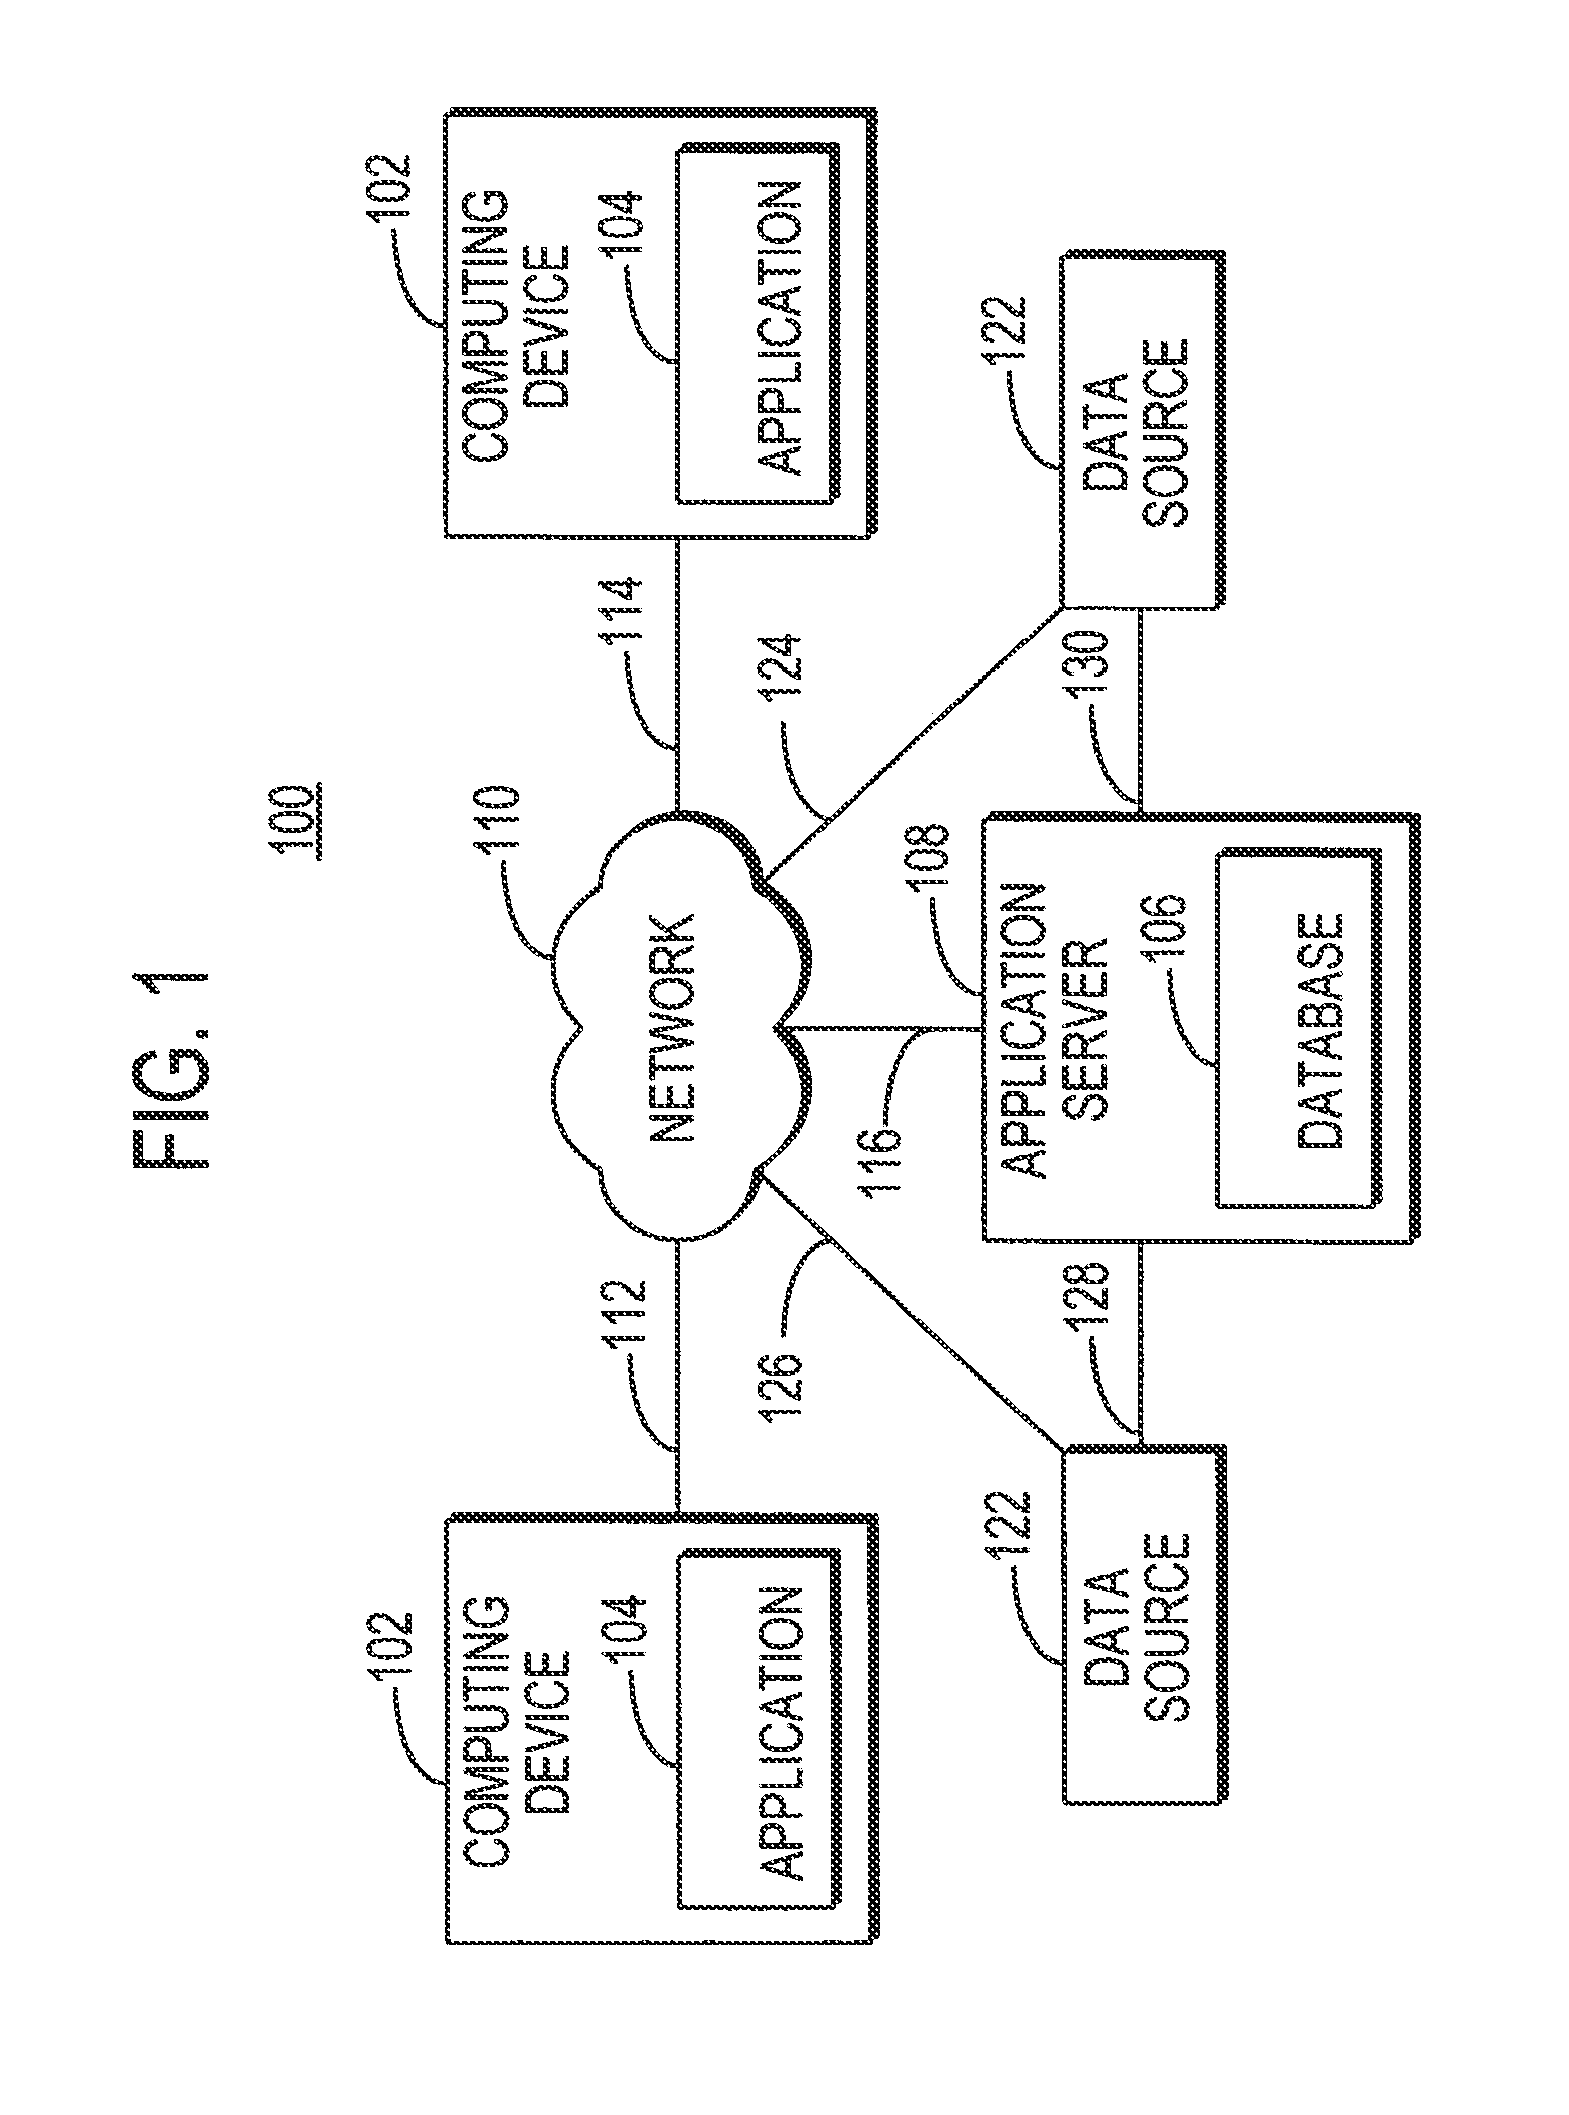 Systems and methods for visual presentation and navigation of content using data-based image analysis